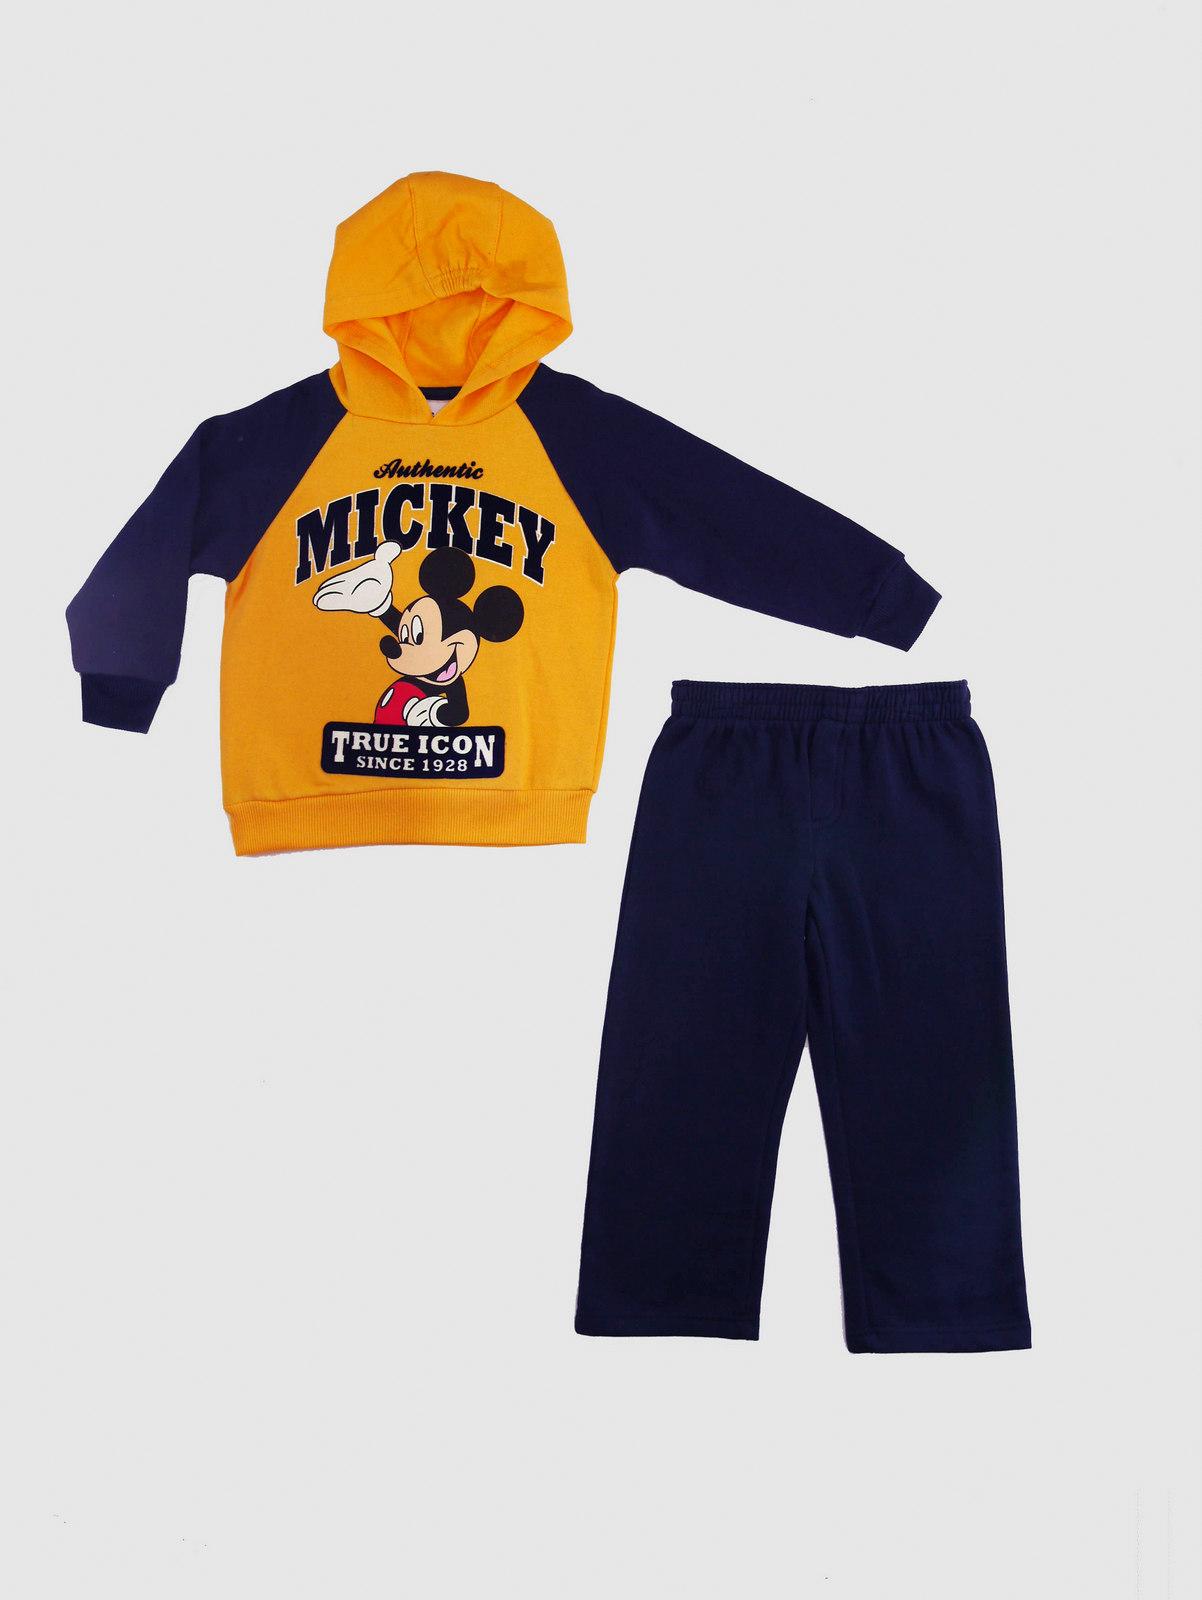 Disney Mickey Mouse Toddler Boy's Hooded T-Shirt & Pants